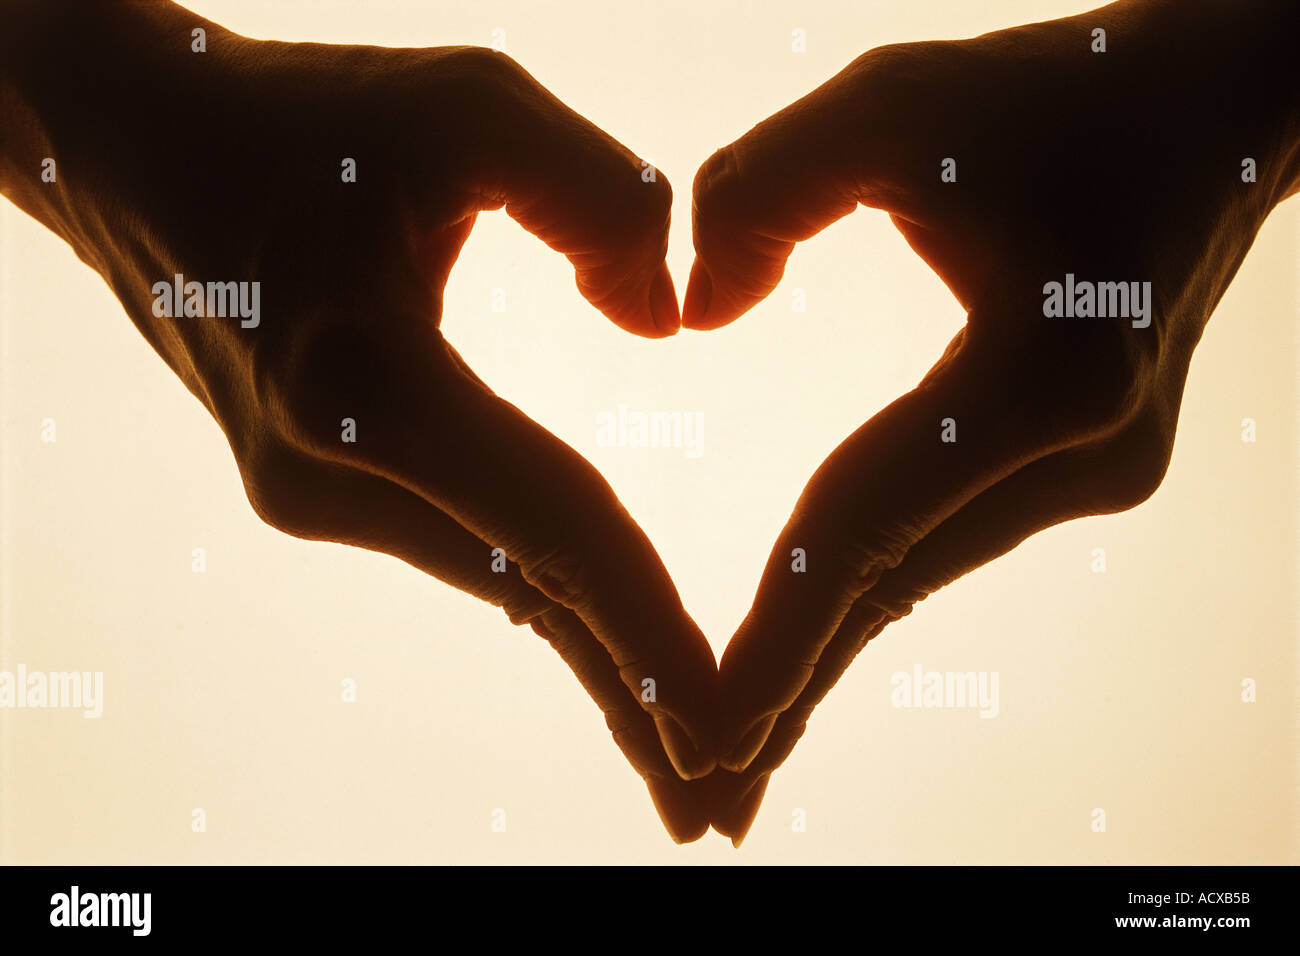 Two hands forming one heart Stock Photo